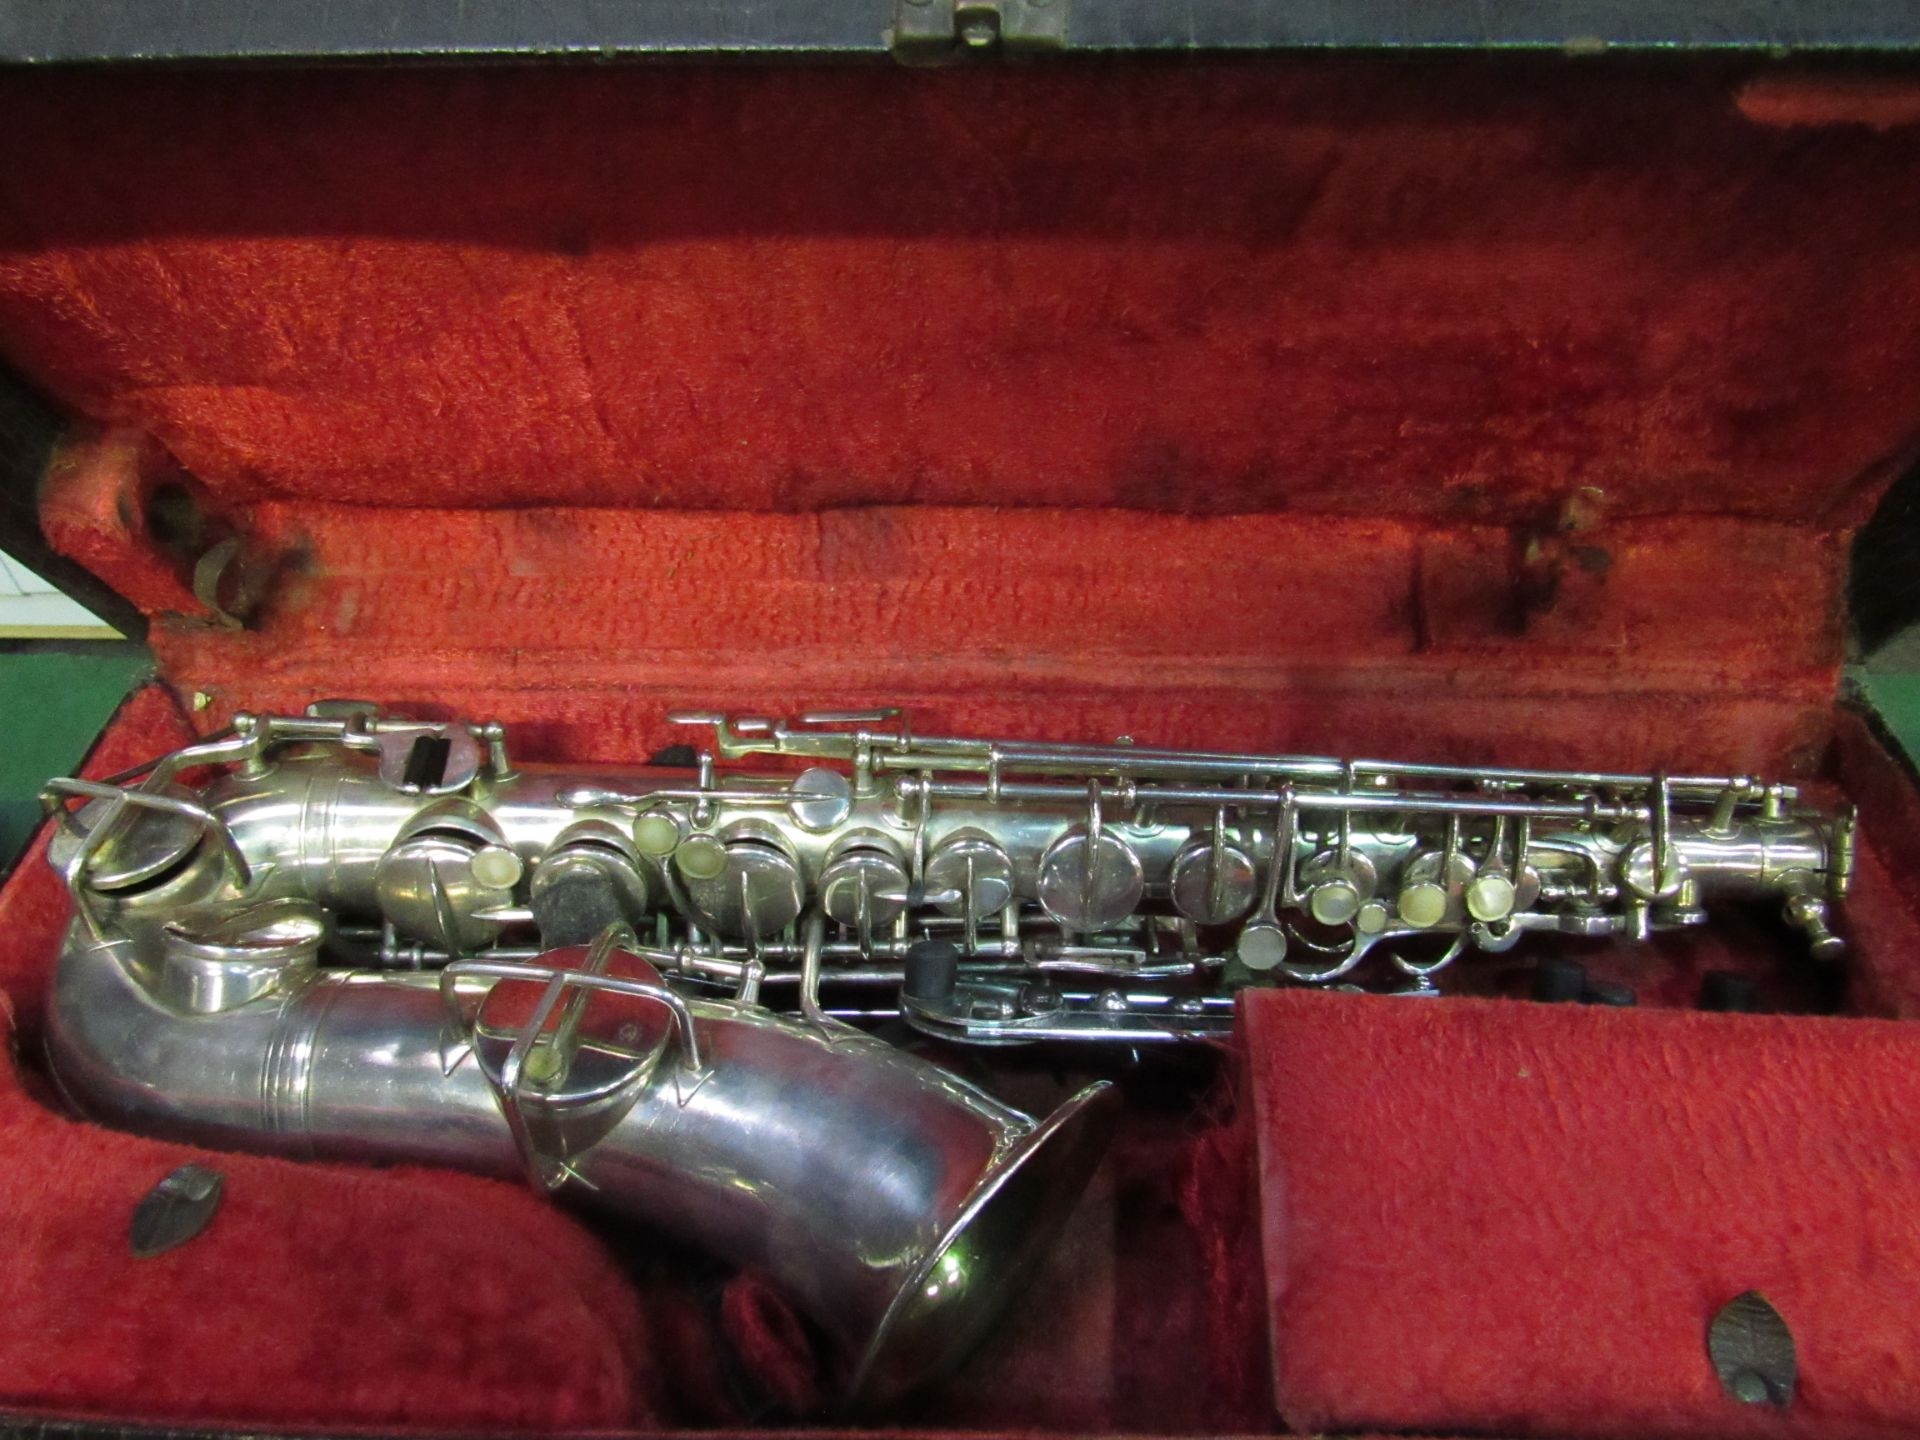 Vintage alto Saxophone engraved Lewin Bros, London, probably manufactured by Martin in the USA.